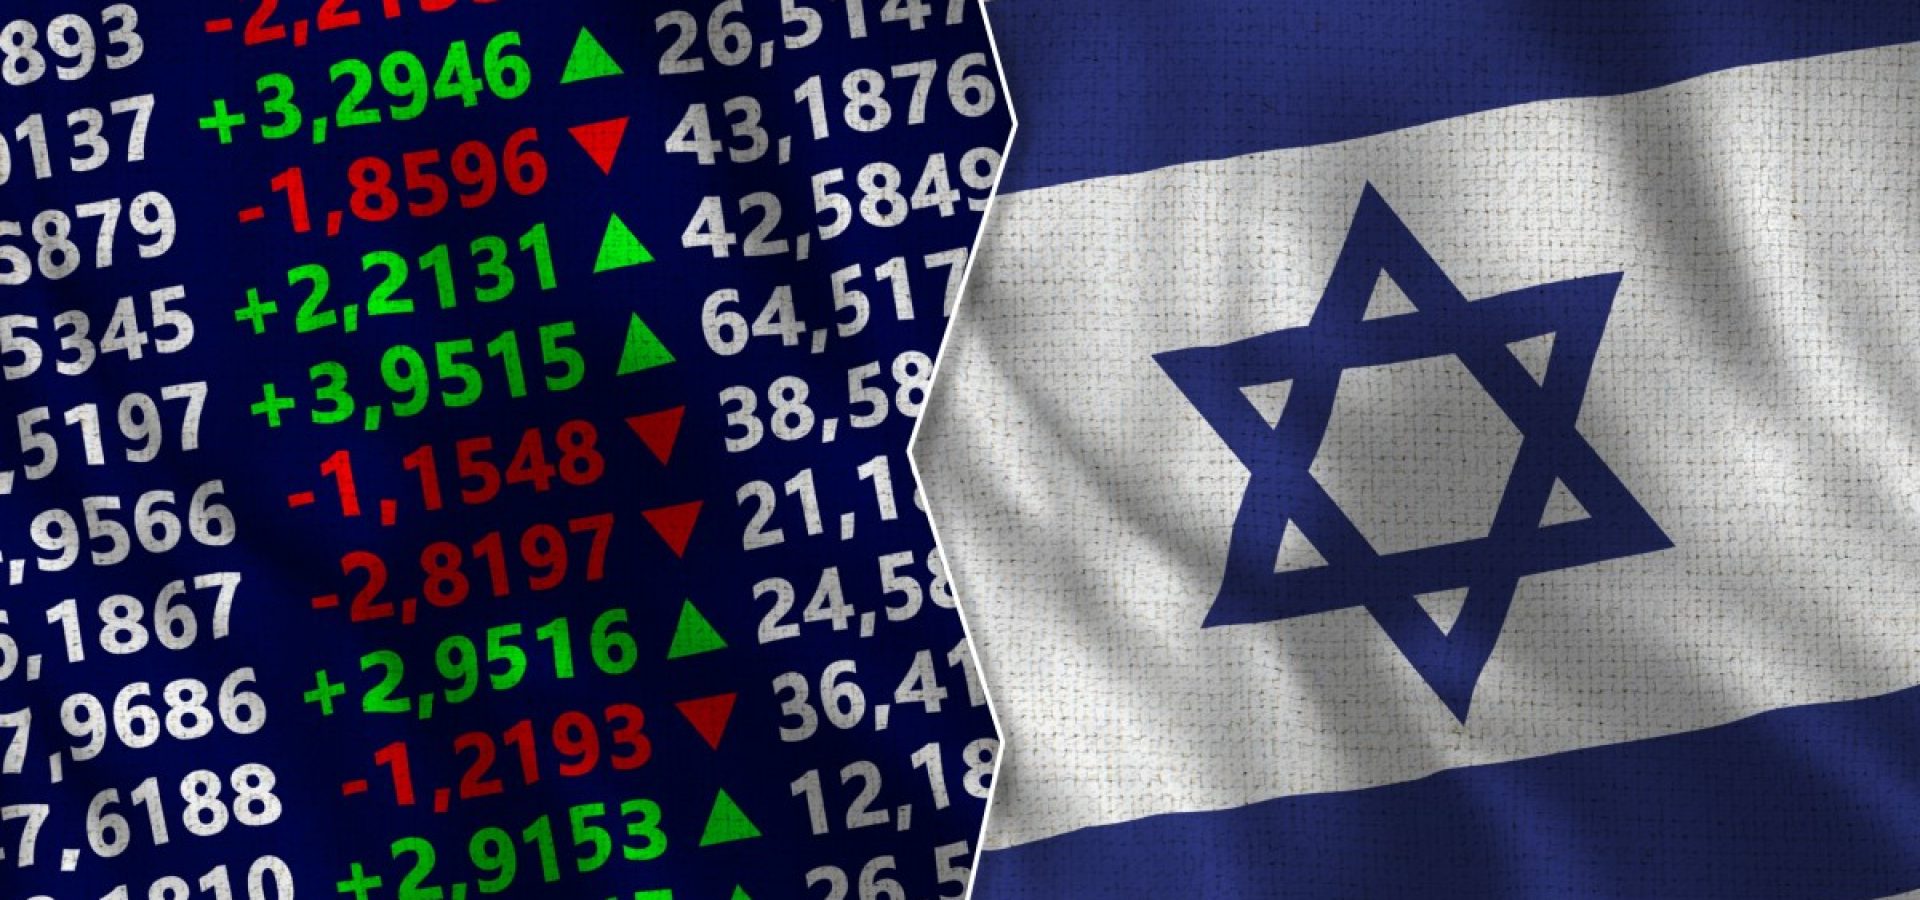 Israel wants Public Exposure from Forex Trading Companies